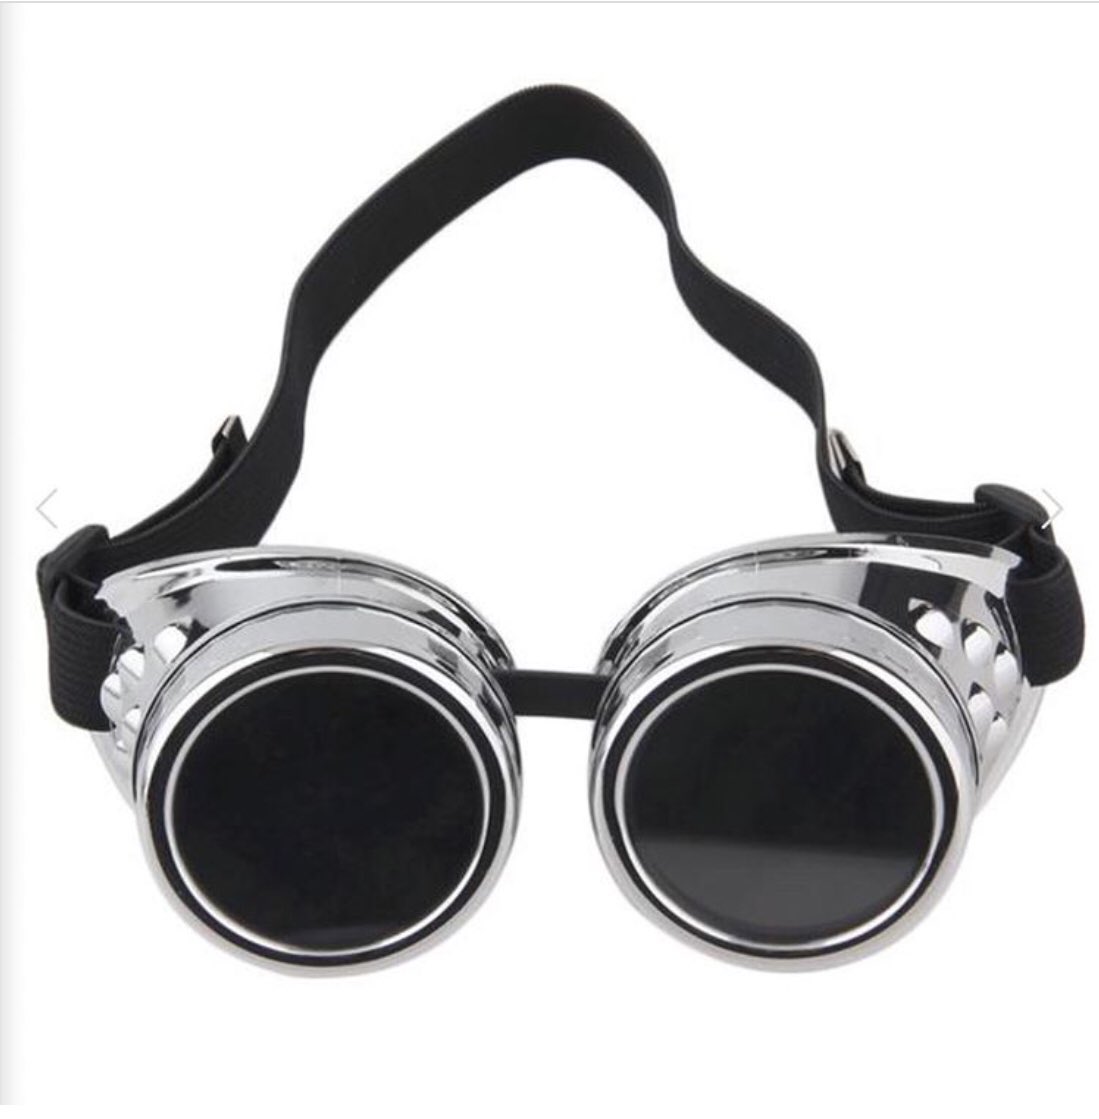 🖤FREE ITEM OF THE WEEK 🖤

RETRO GOGGLES 🔭

Just pay shipping! Link in our bio!
Offer Ends on Sunday! ⏰

#aesthetictumblr #aestheticposts #aestheticpost #tumblraesthetic #paleaesthetic #softgrunge #grungegirl #grungeaccount #grungeaesthetic #grungeoutfit #palegrunge